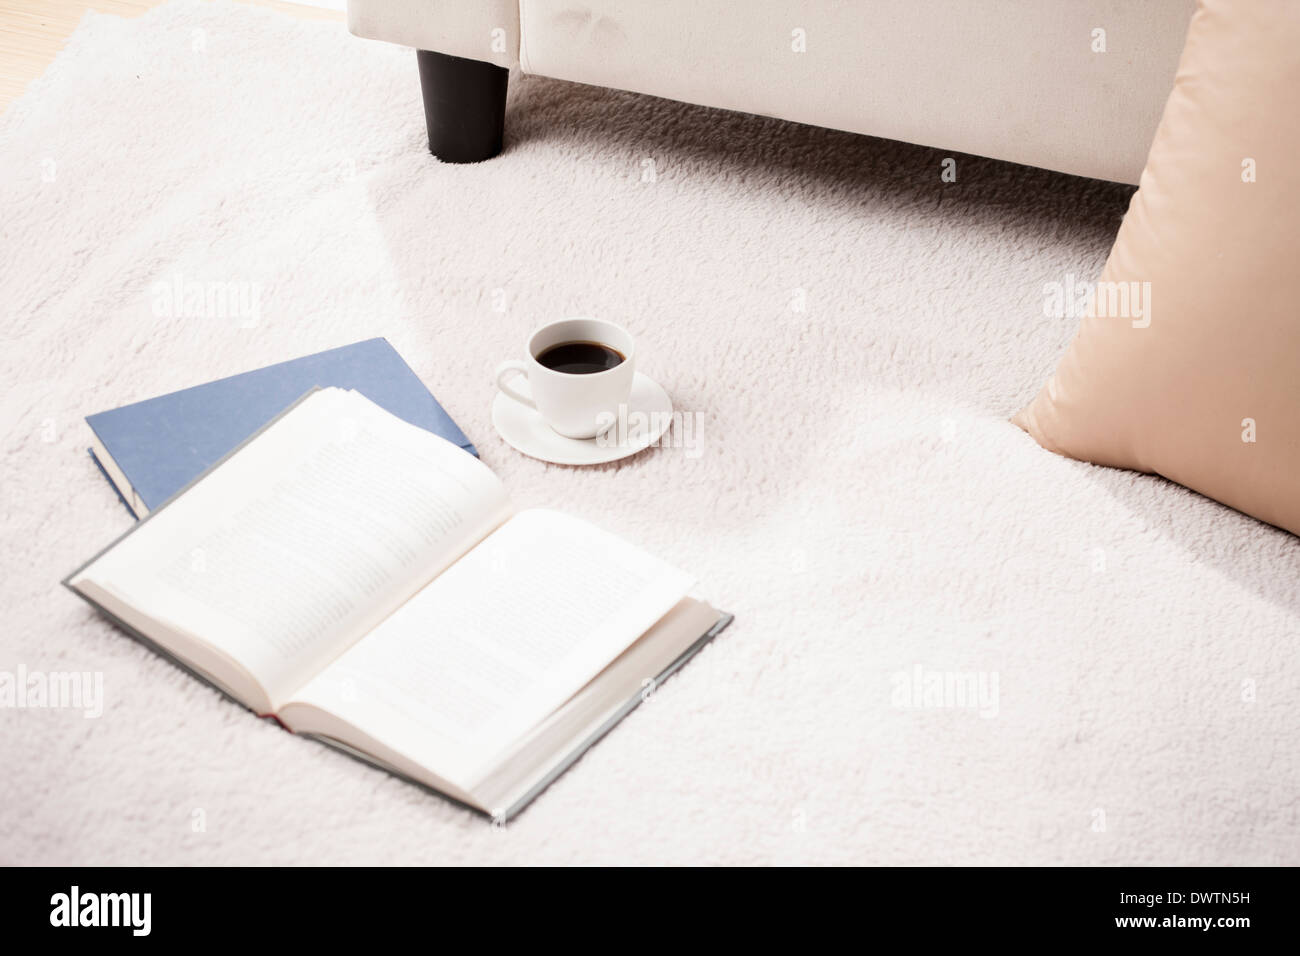 an open book and a cup on the floor Stock Photo